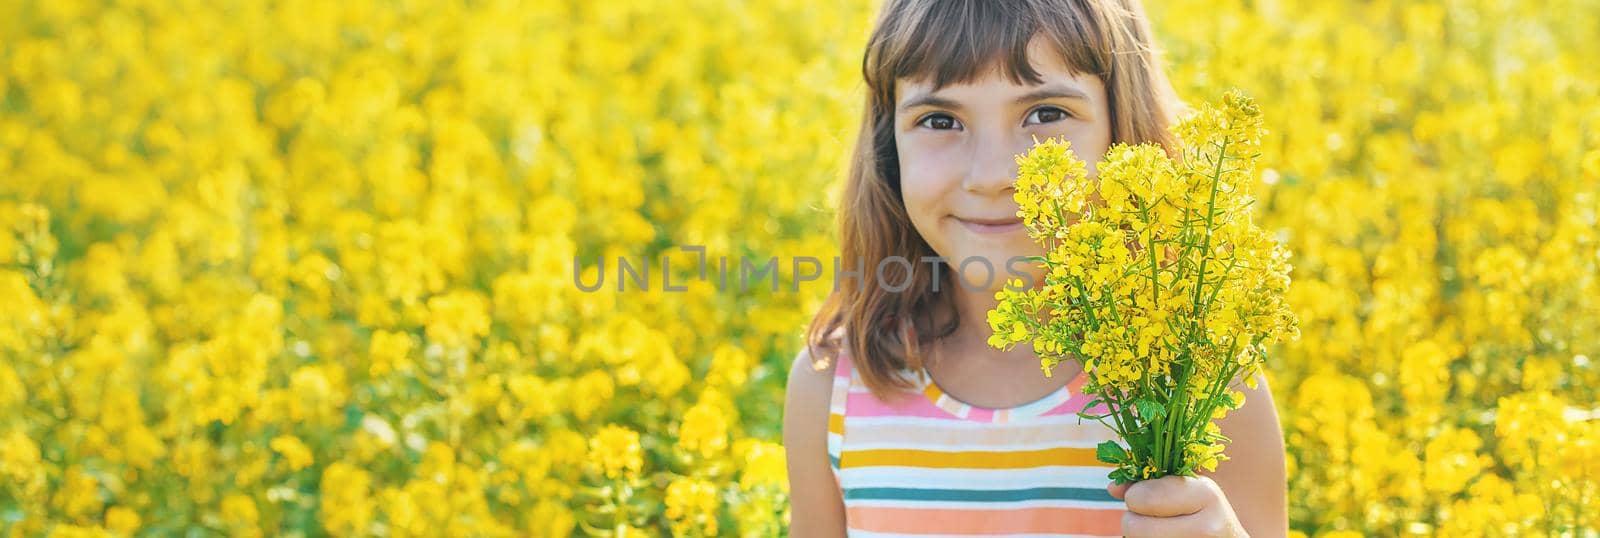 A child in a yellow field, mustard blooms. Selective focus. by yanadjana